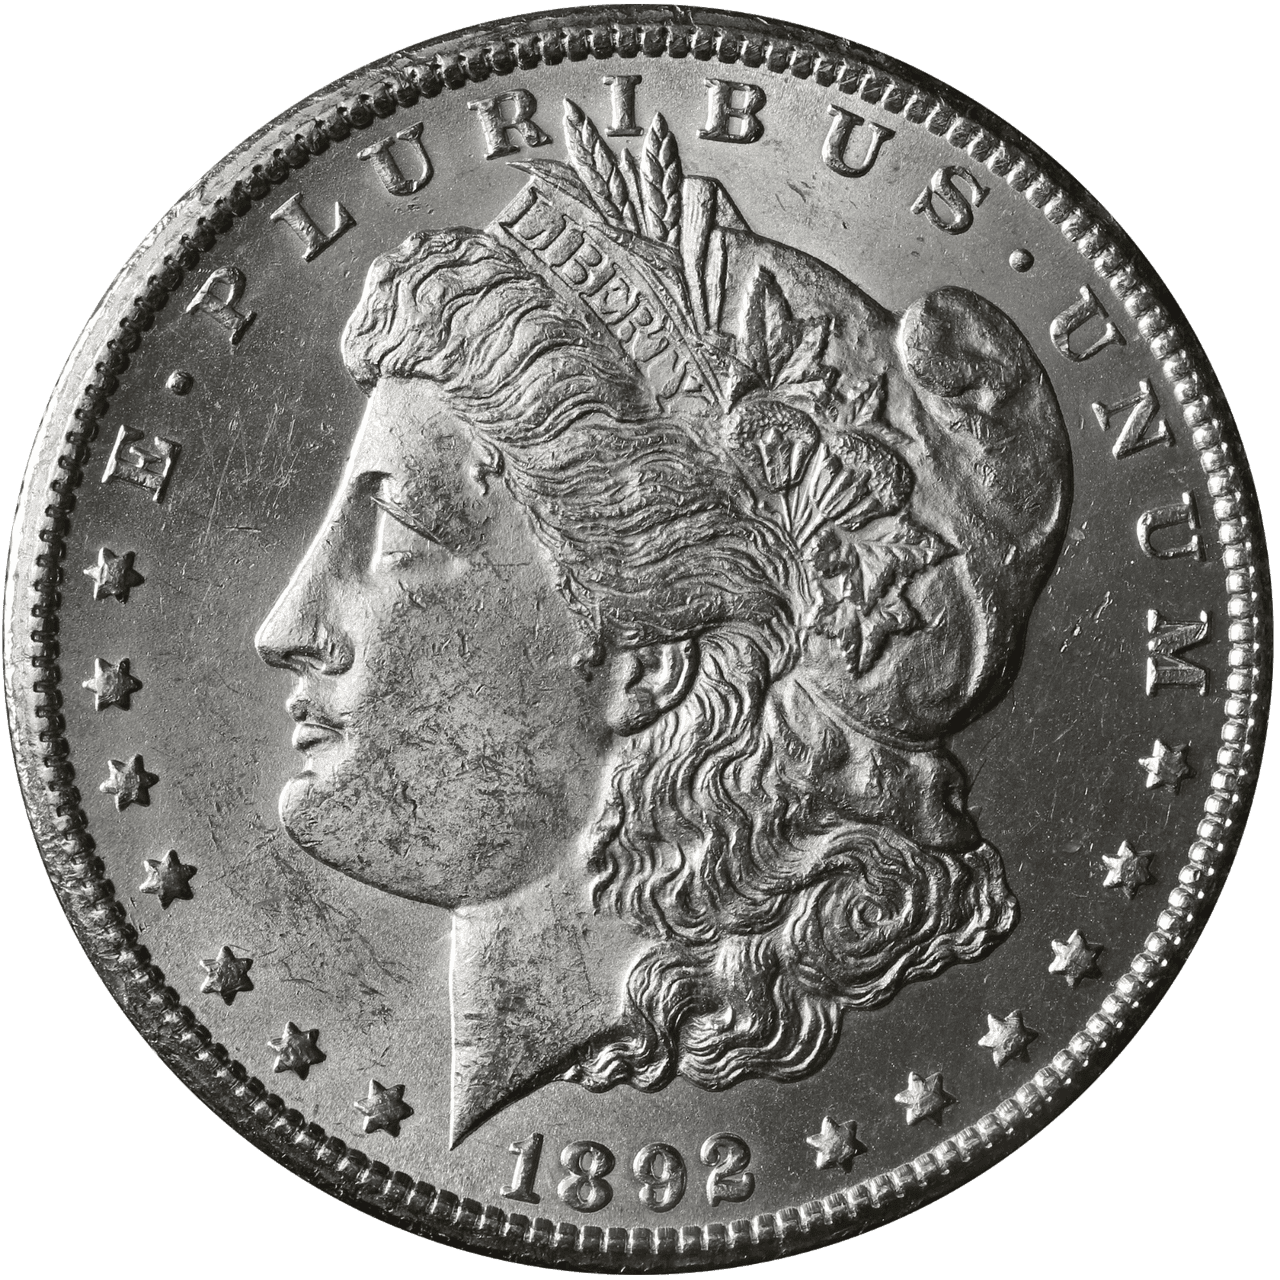 The Obverse of the 1892 Silver Dollar